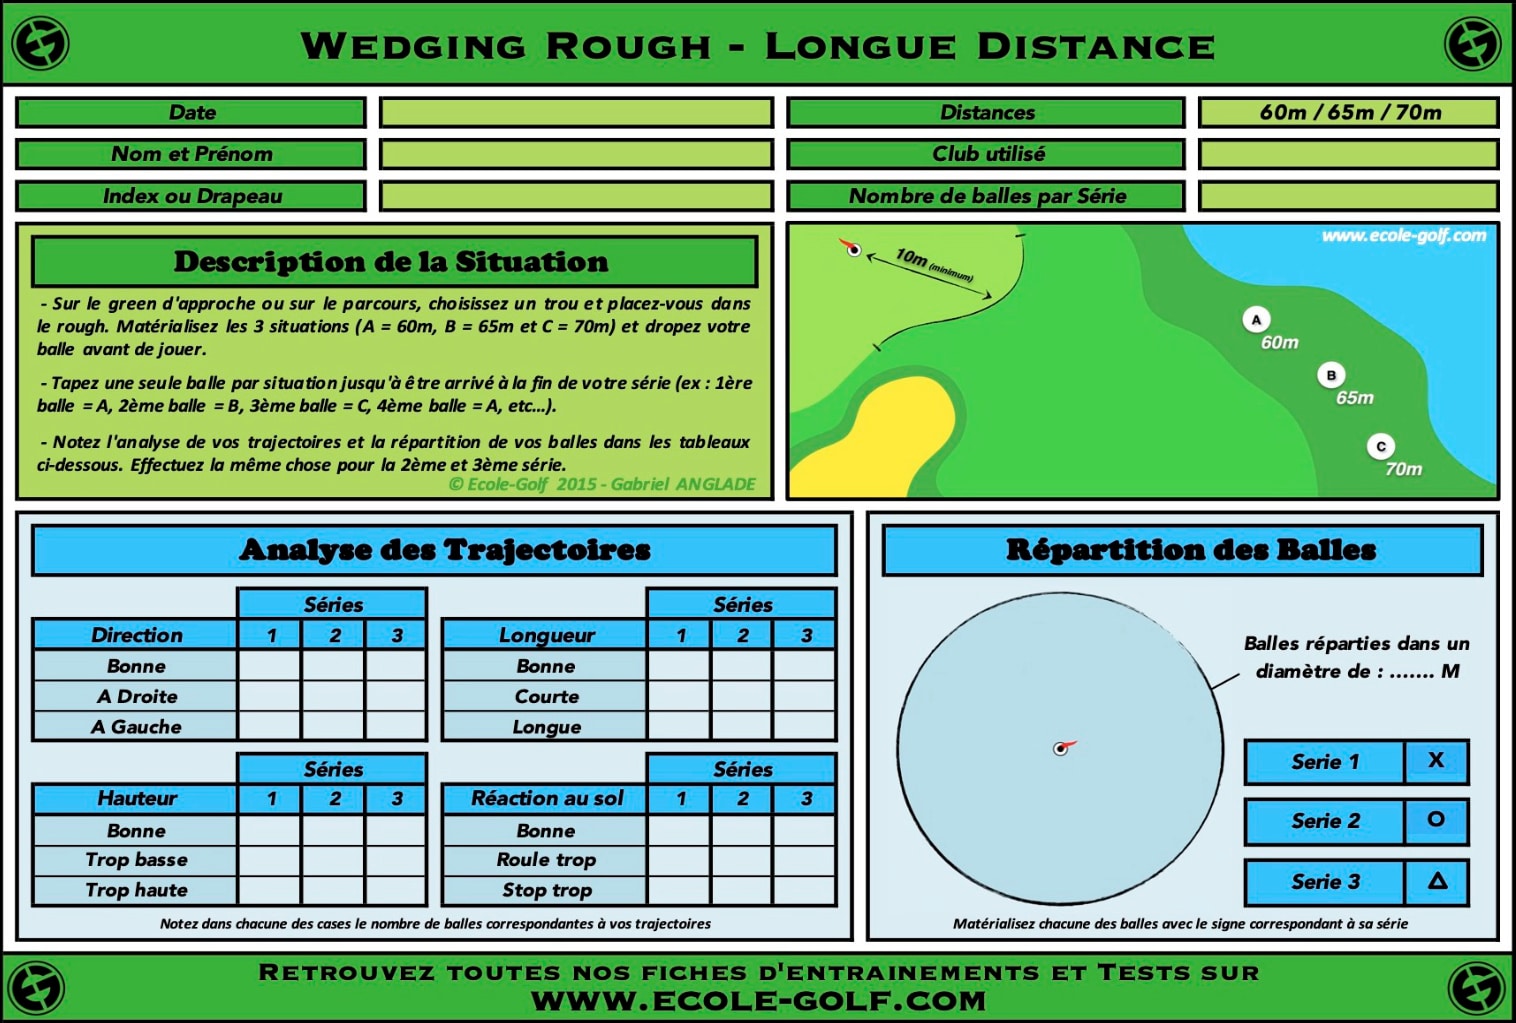 Wedging Rough - Longue Distance